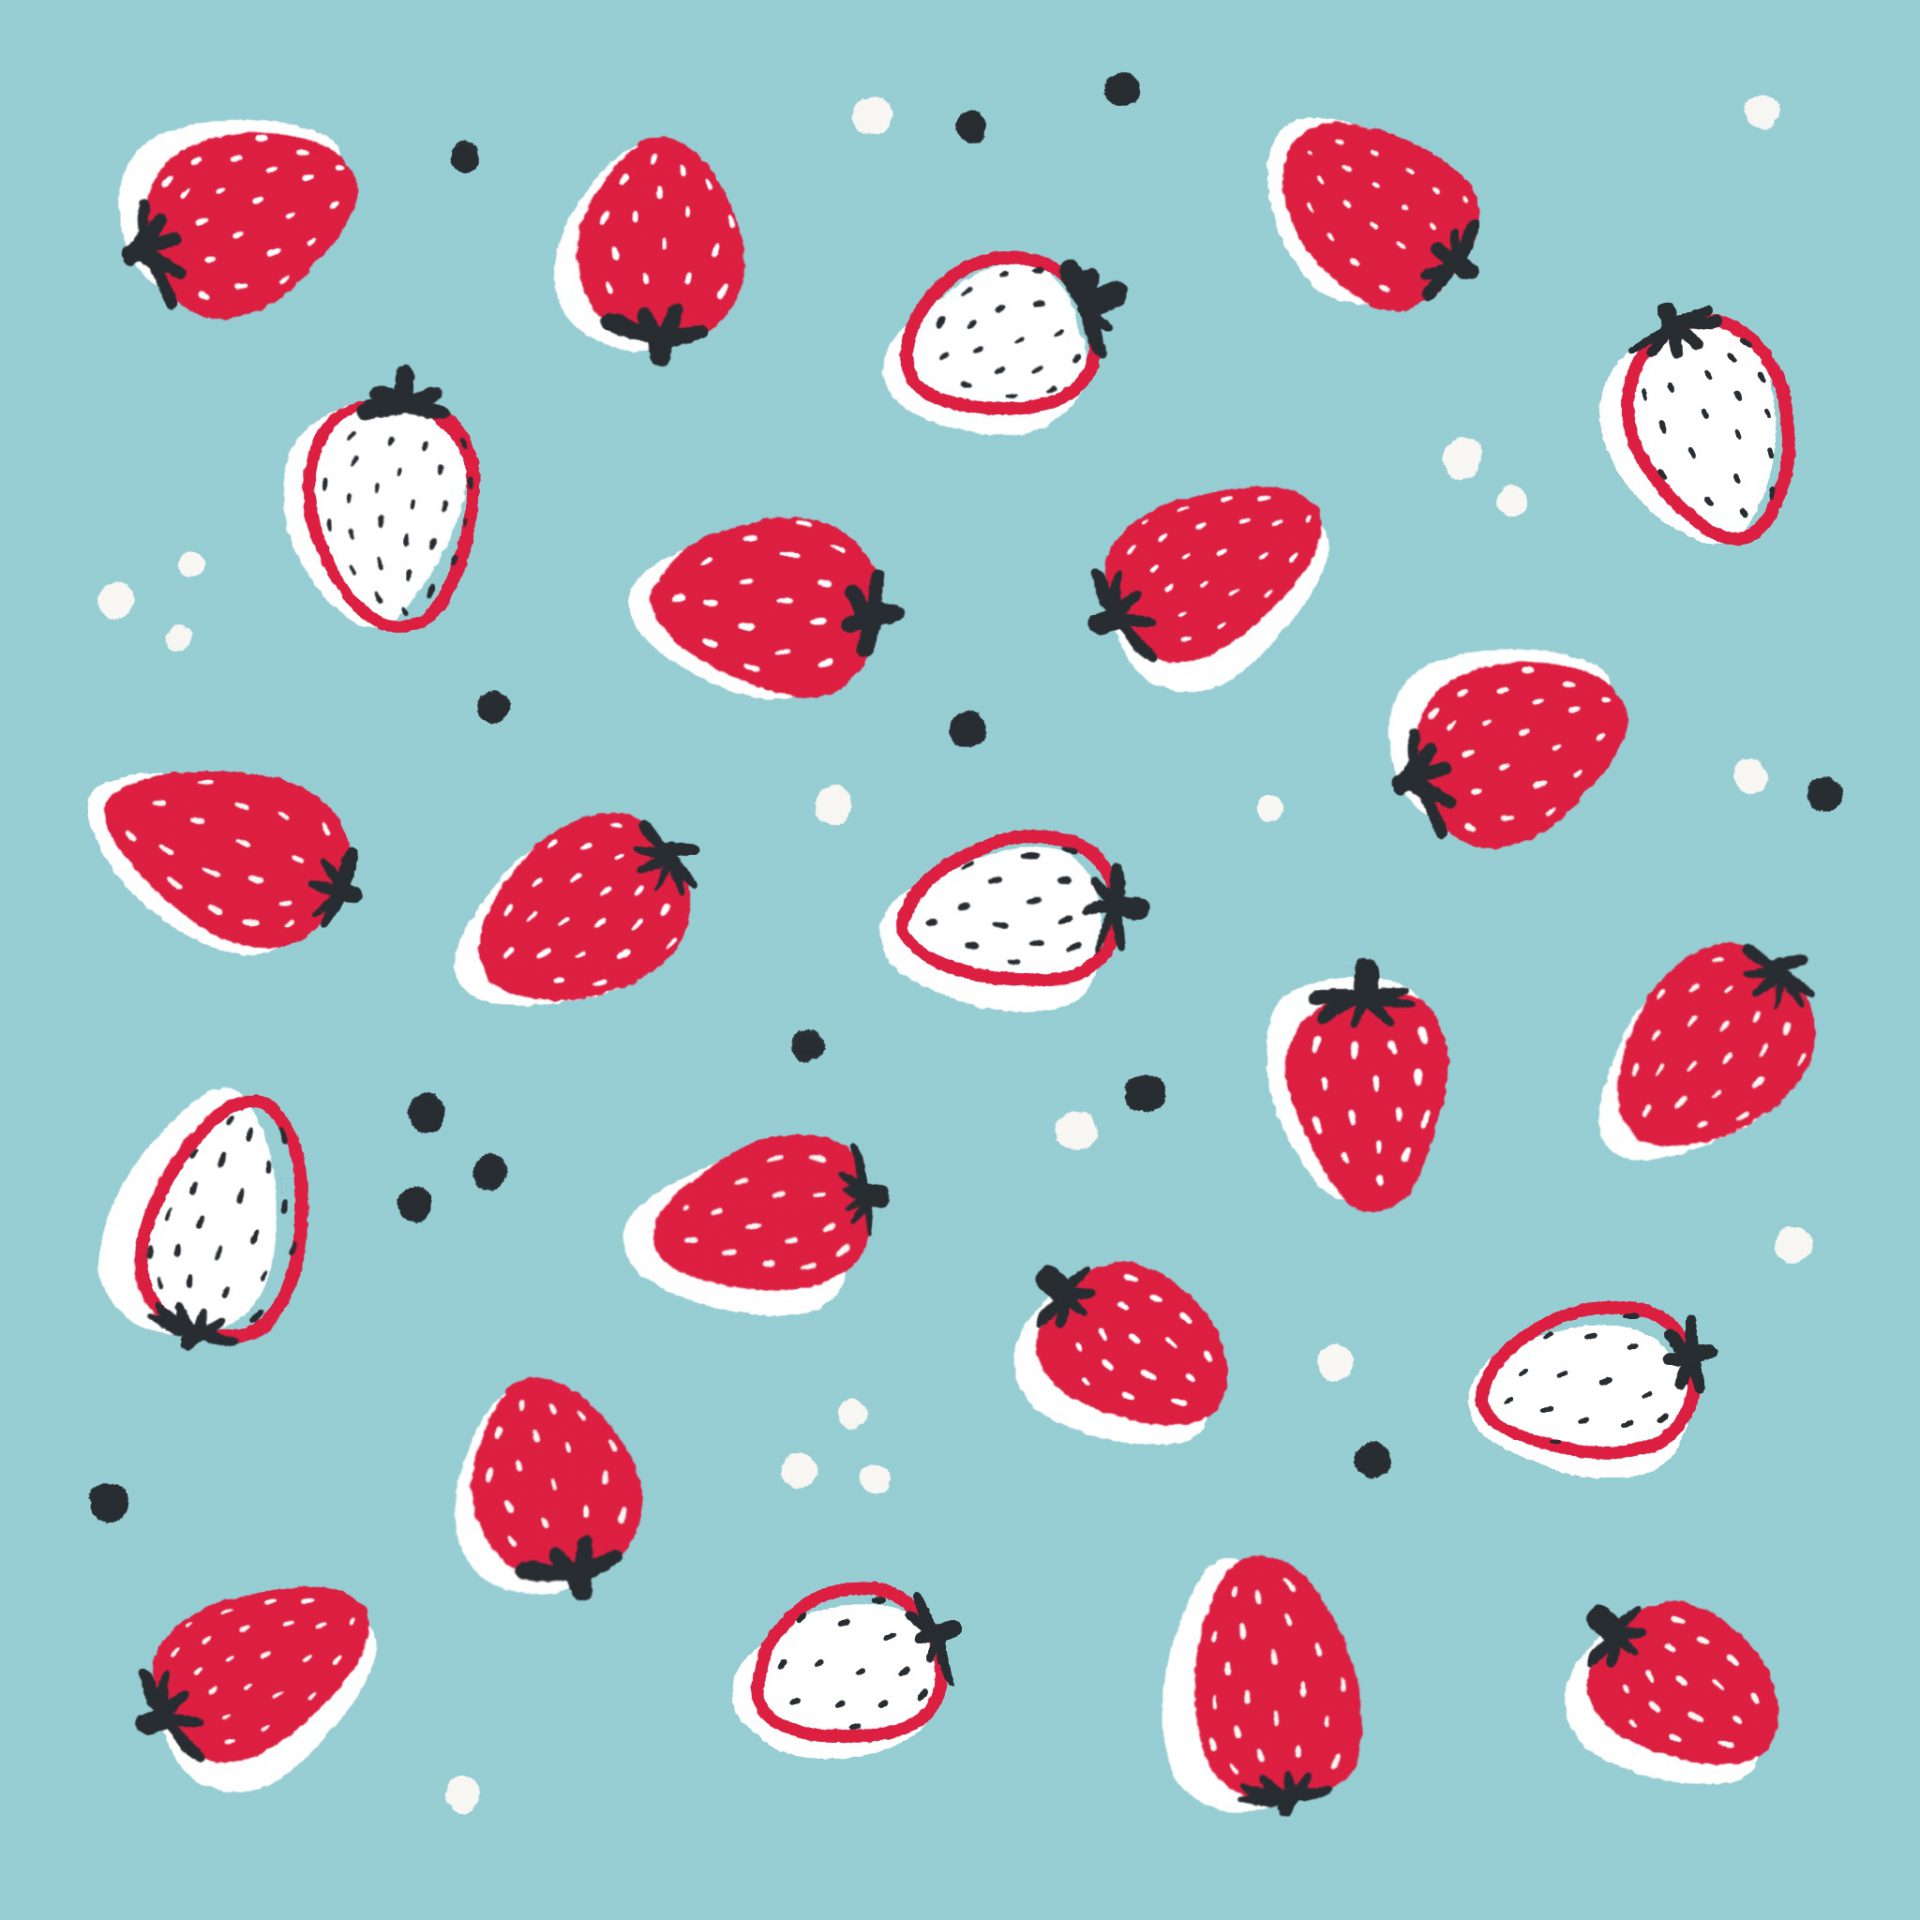 An illustrated pattern of strawberries